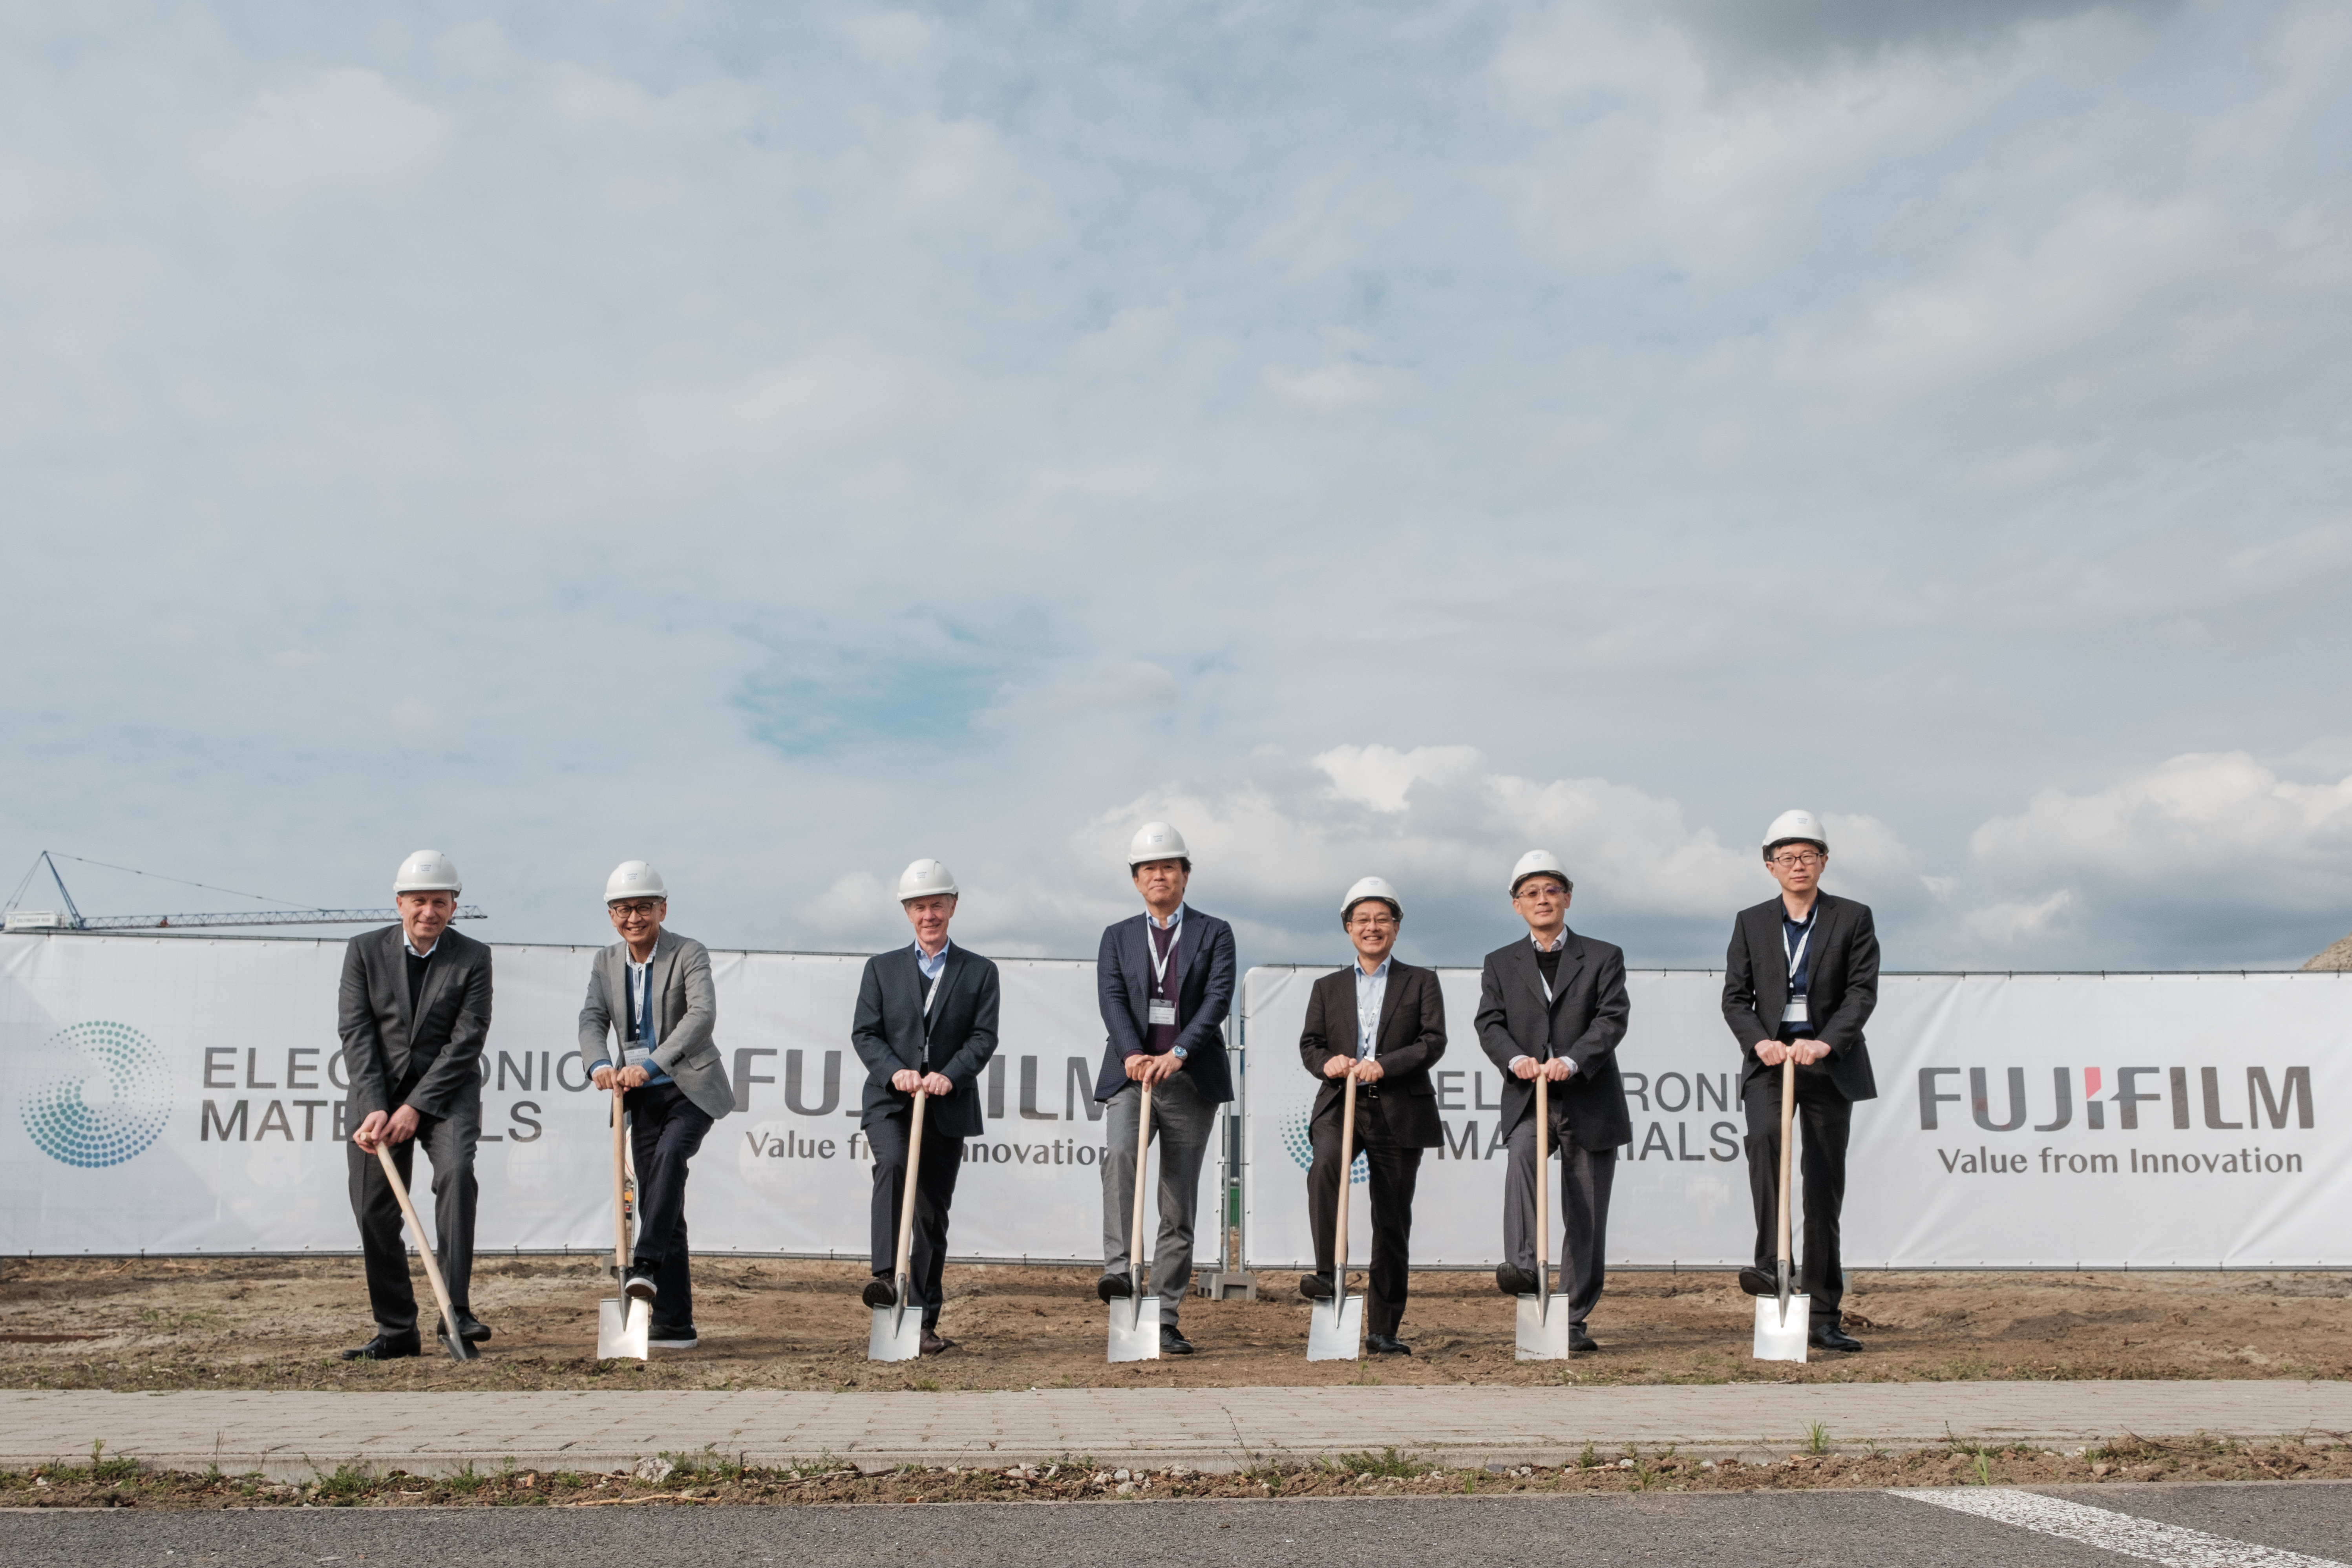 Electronic Materials Leadership Team joins at the ground breaking ceremony of the electronic materials production site in Belgium